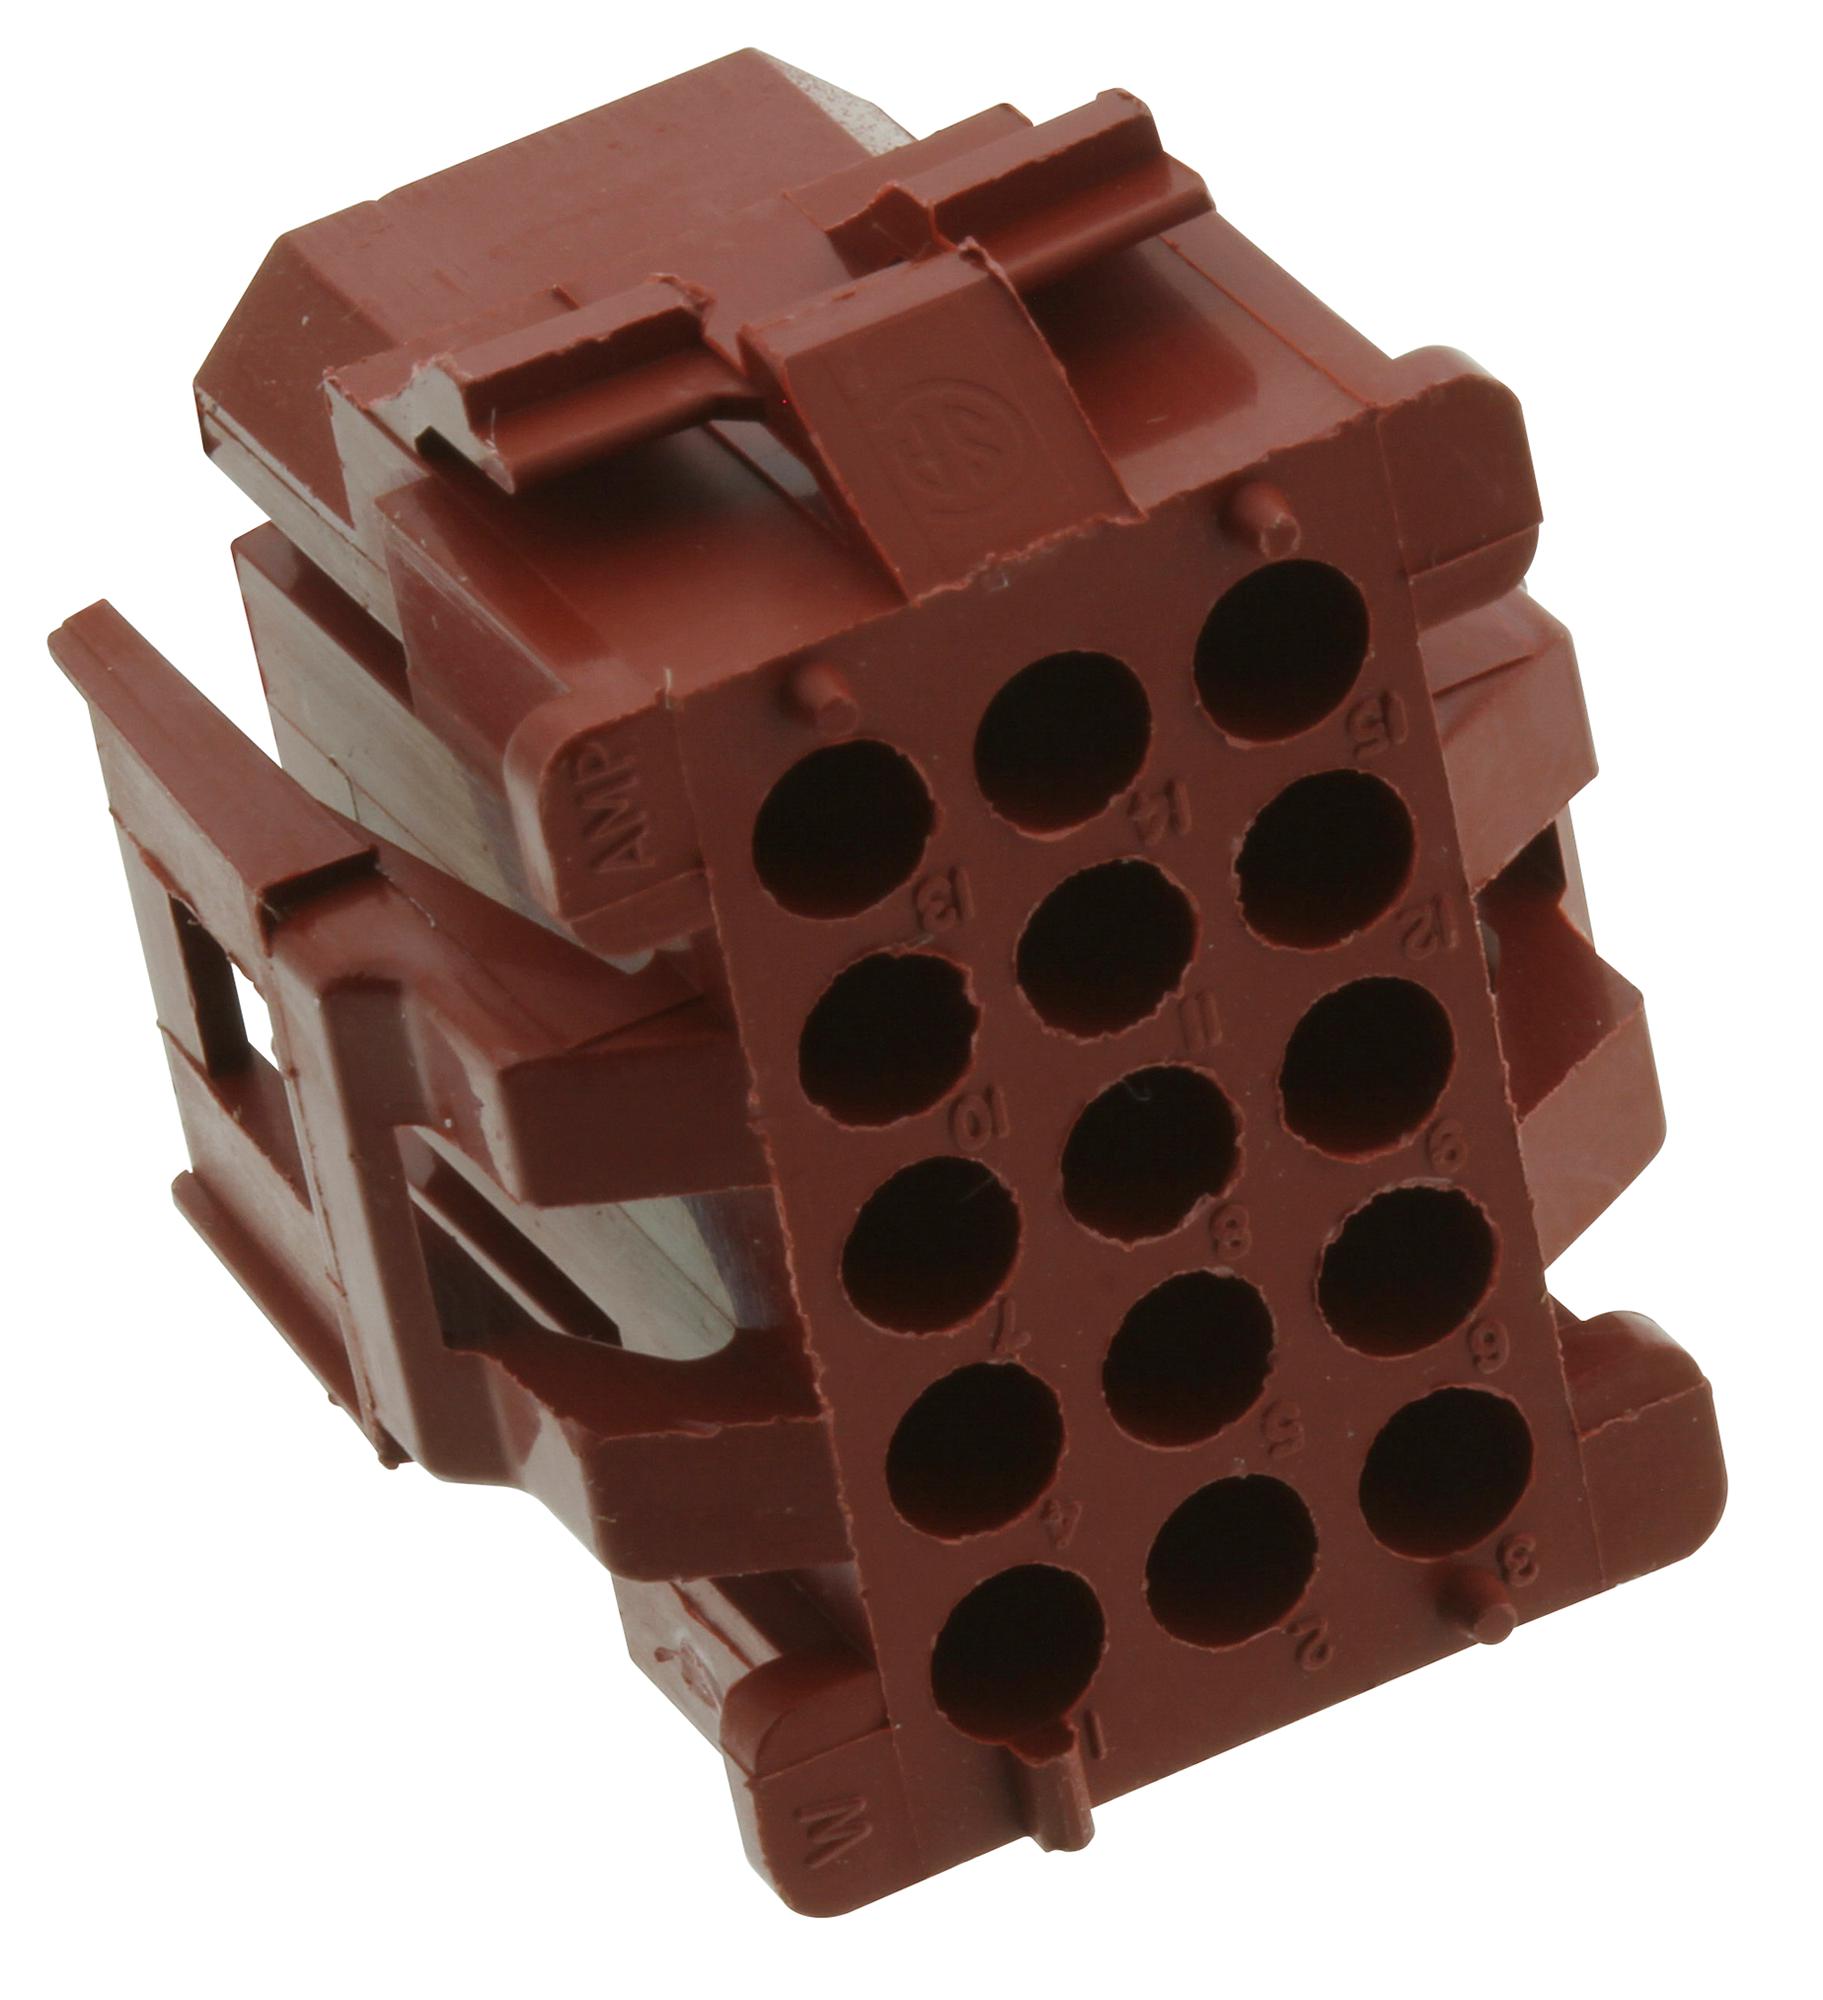 1-640523-0 CONNECTOR HOUSING, PLUG, 15POS, 4.2MM AMP - TE CONNECTIVITY